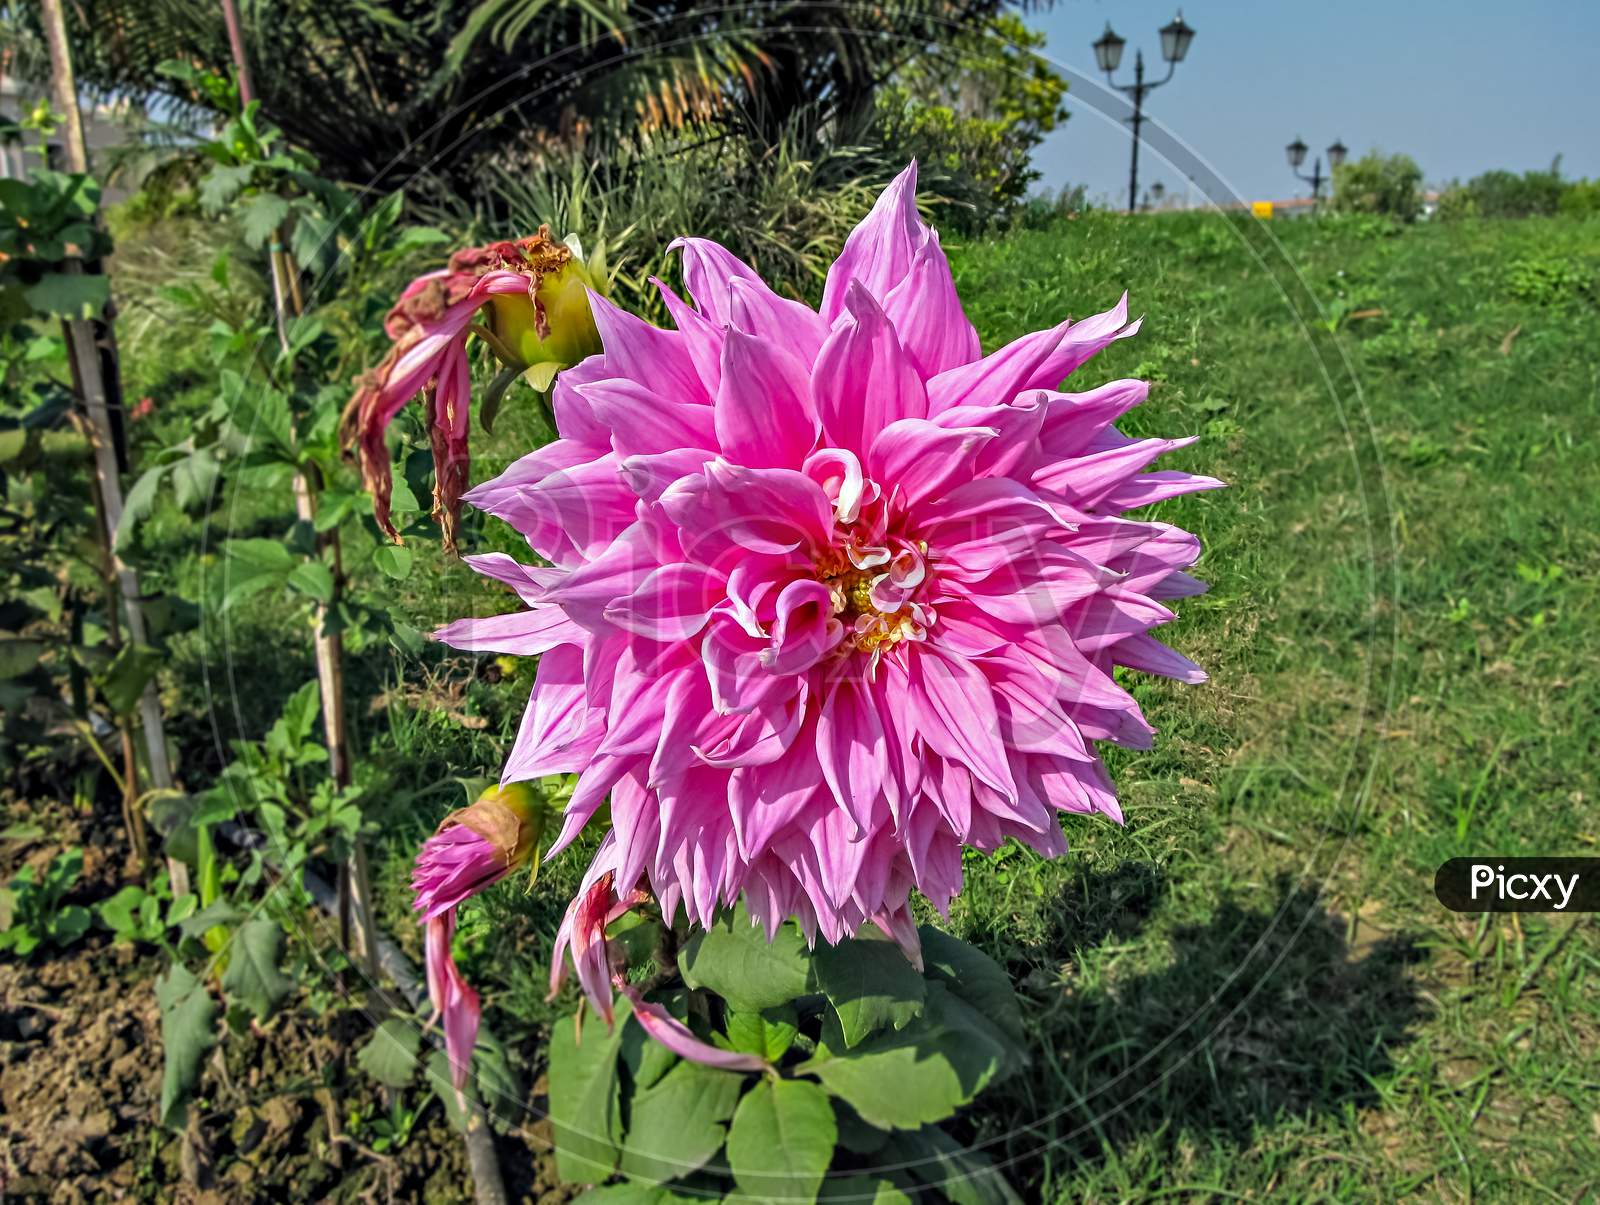 Selective Focus, Blur Background, Close Up Of Bright Pink Dahlia Flower In Park.